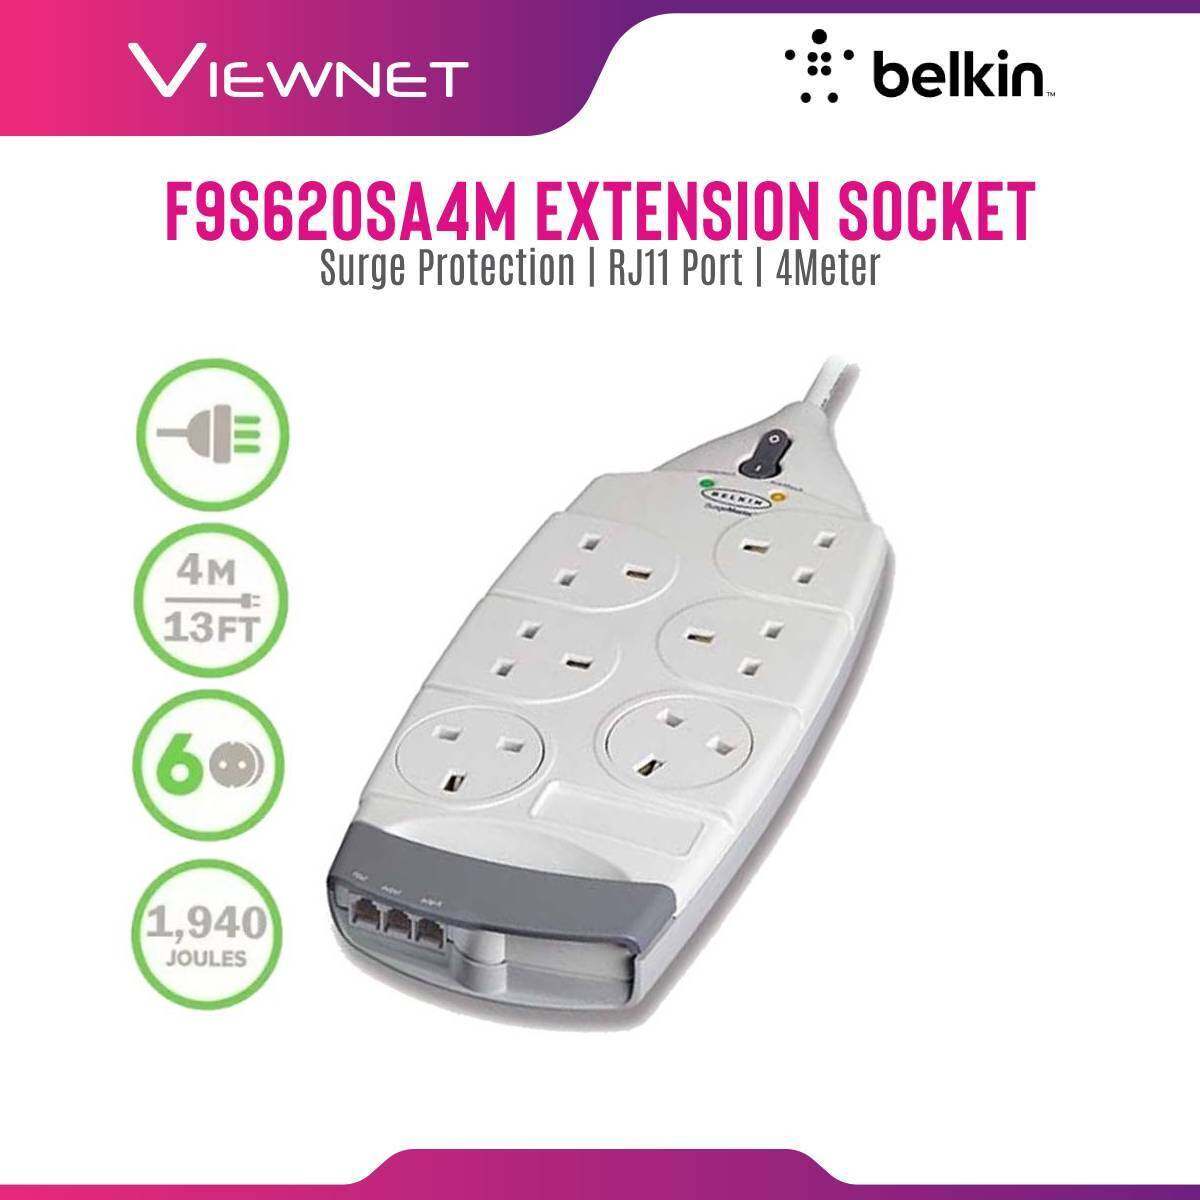 Belkin F9S620SA4M Extension Socket Surge Protector 6-Plugs With RJ11 Port Protection 4M